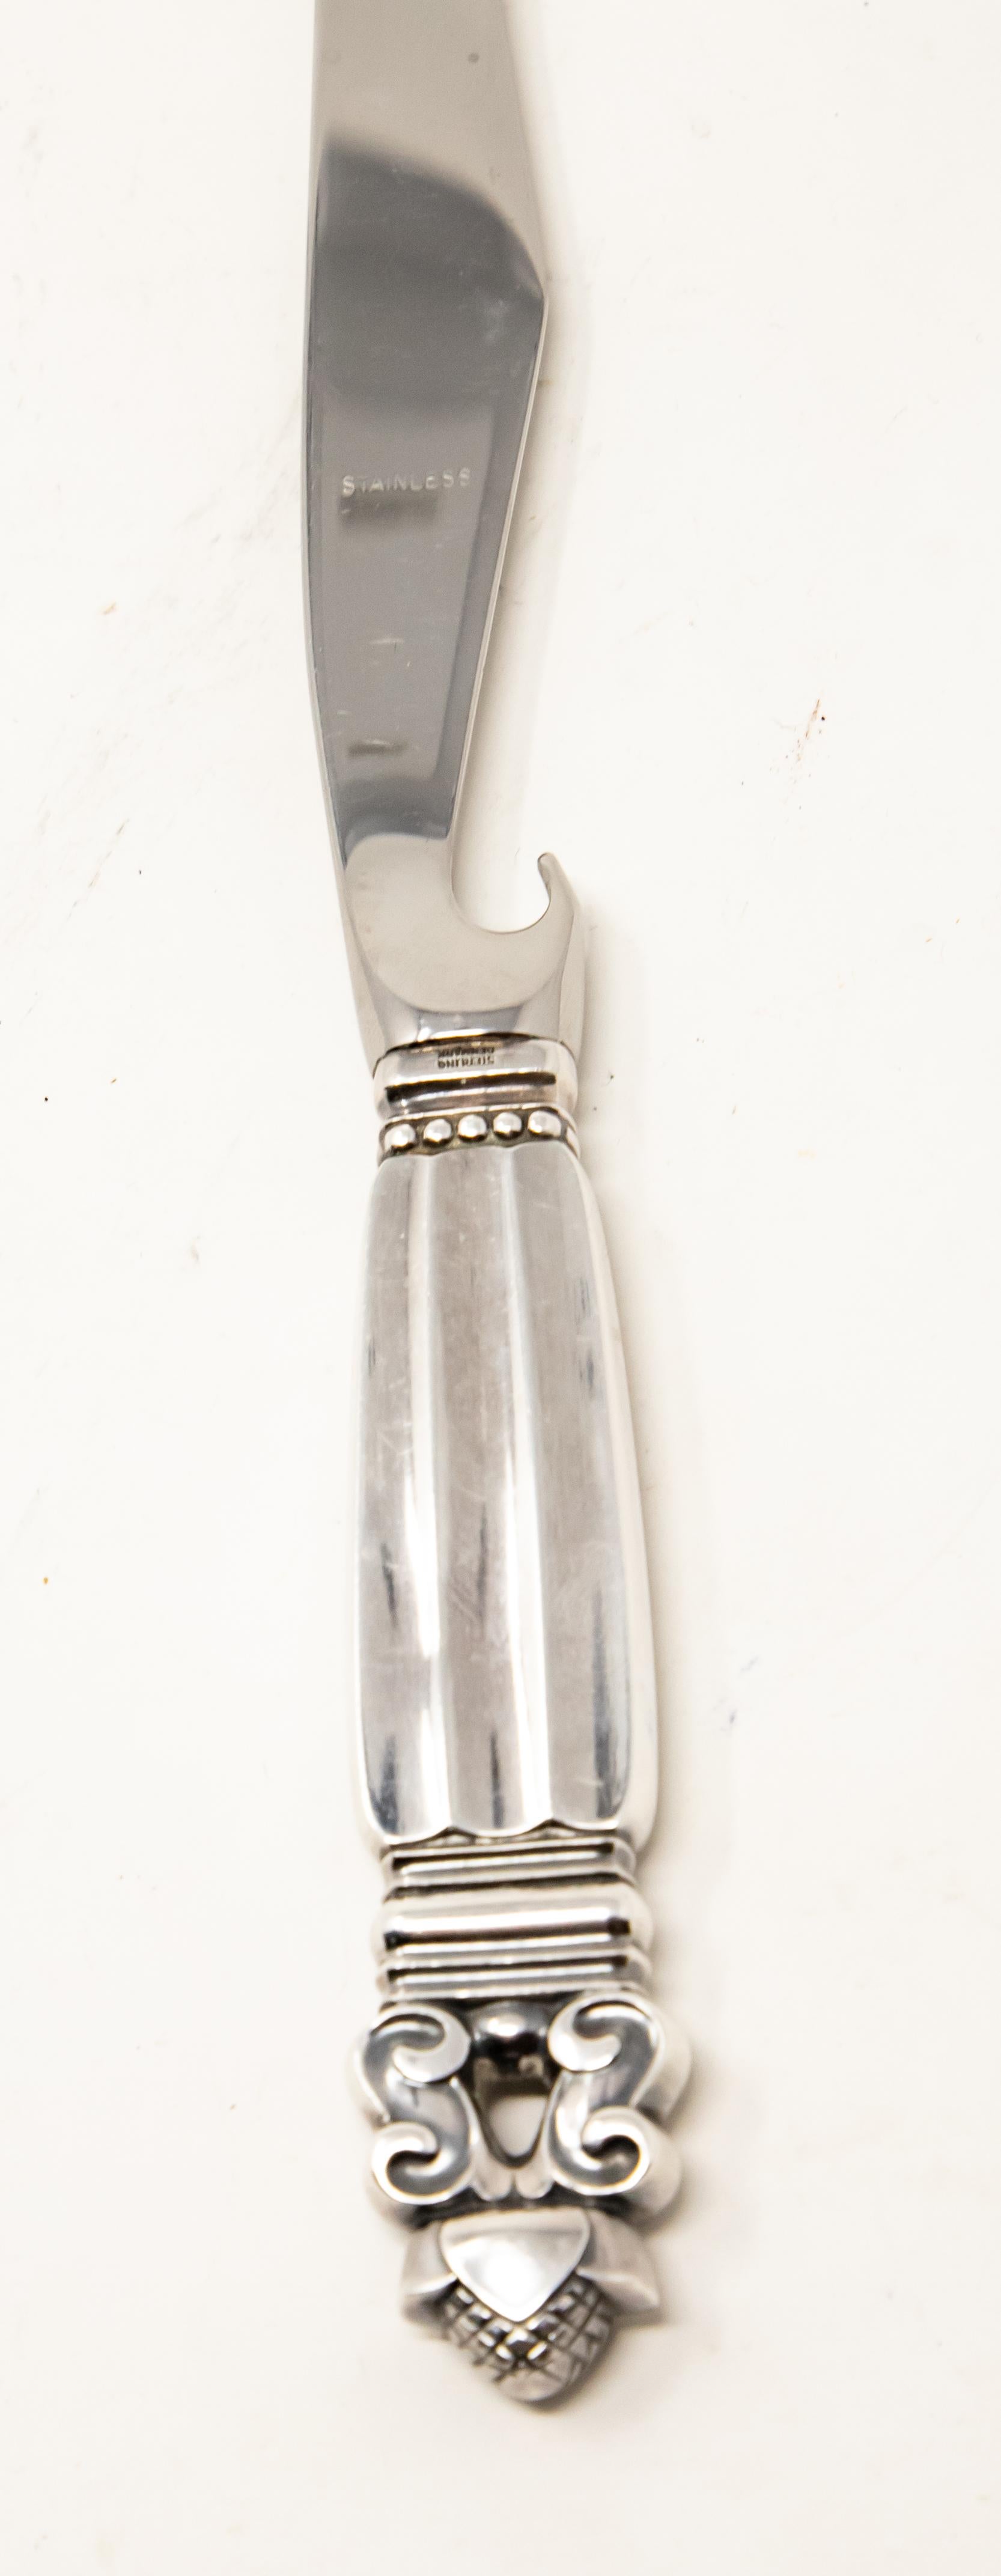 Offering this elegant Georg Jensen pronged bar knife. The pattern of the knife is acorn. The handle is marked Sterling, Denmark with a stainless blade. Has the bottle opener and pronged tip.